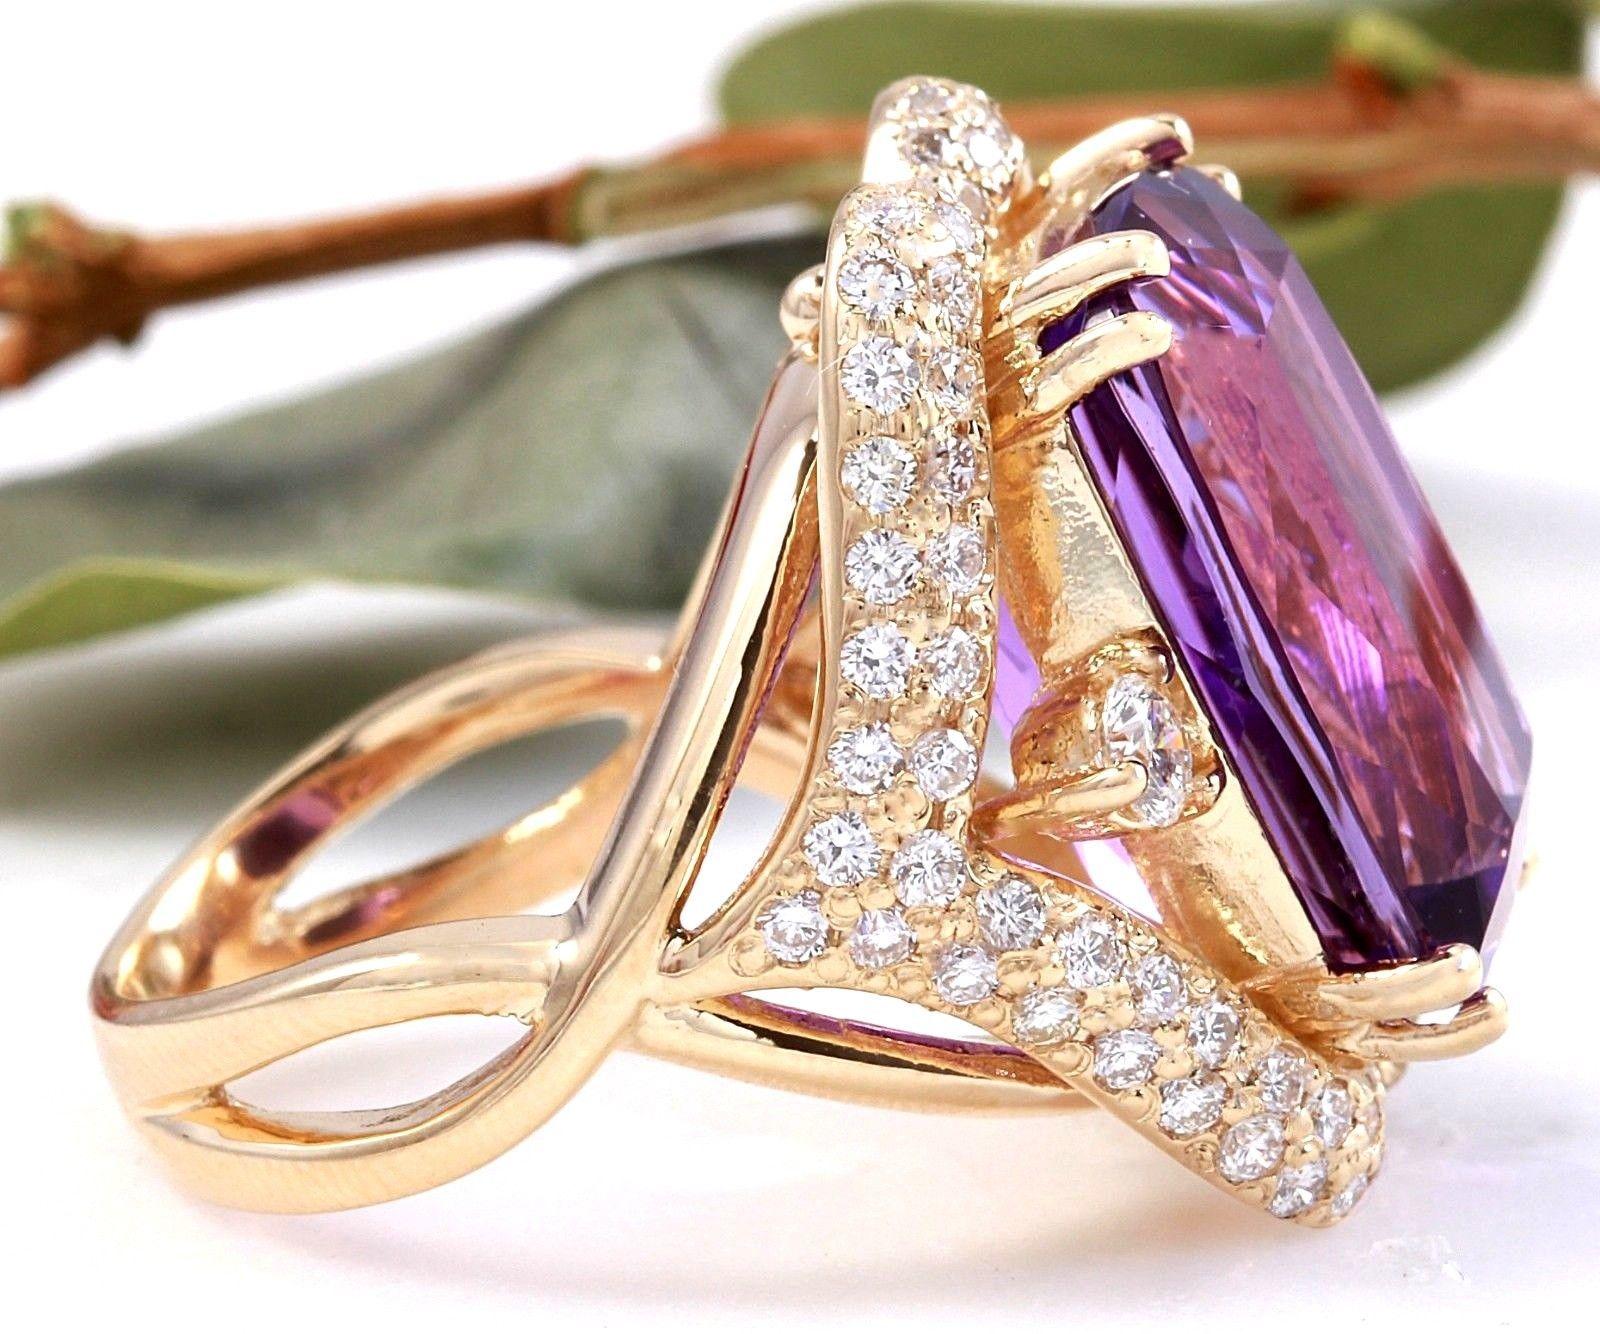 13.50 Carats Natural Amethyst and Diamond 14K Solid Yellow Gold Ring

Total Natural Cushion Shaped Amethyst Weights: Approx. 12.00 Carats

Amethyst Measures: 17.00 x 13mm

Natural Round Diamonds Weight: Approx. 1.50 Carats (color G-H / Clarity